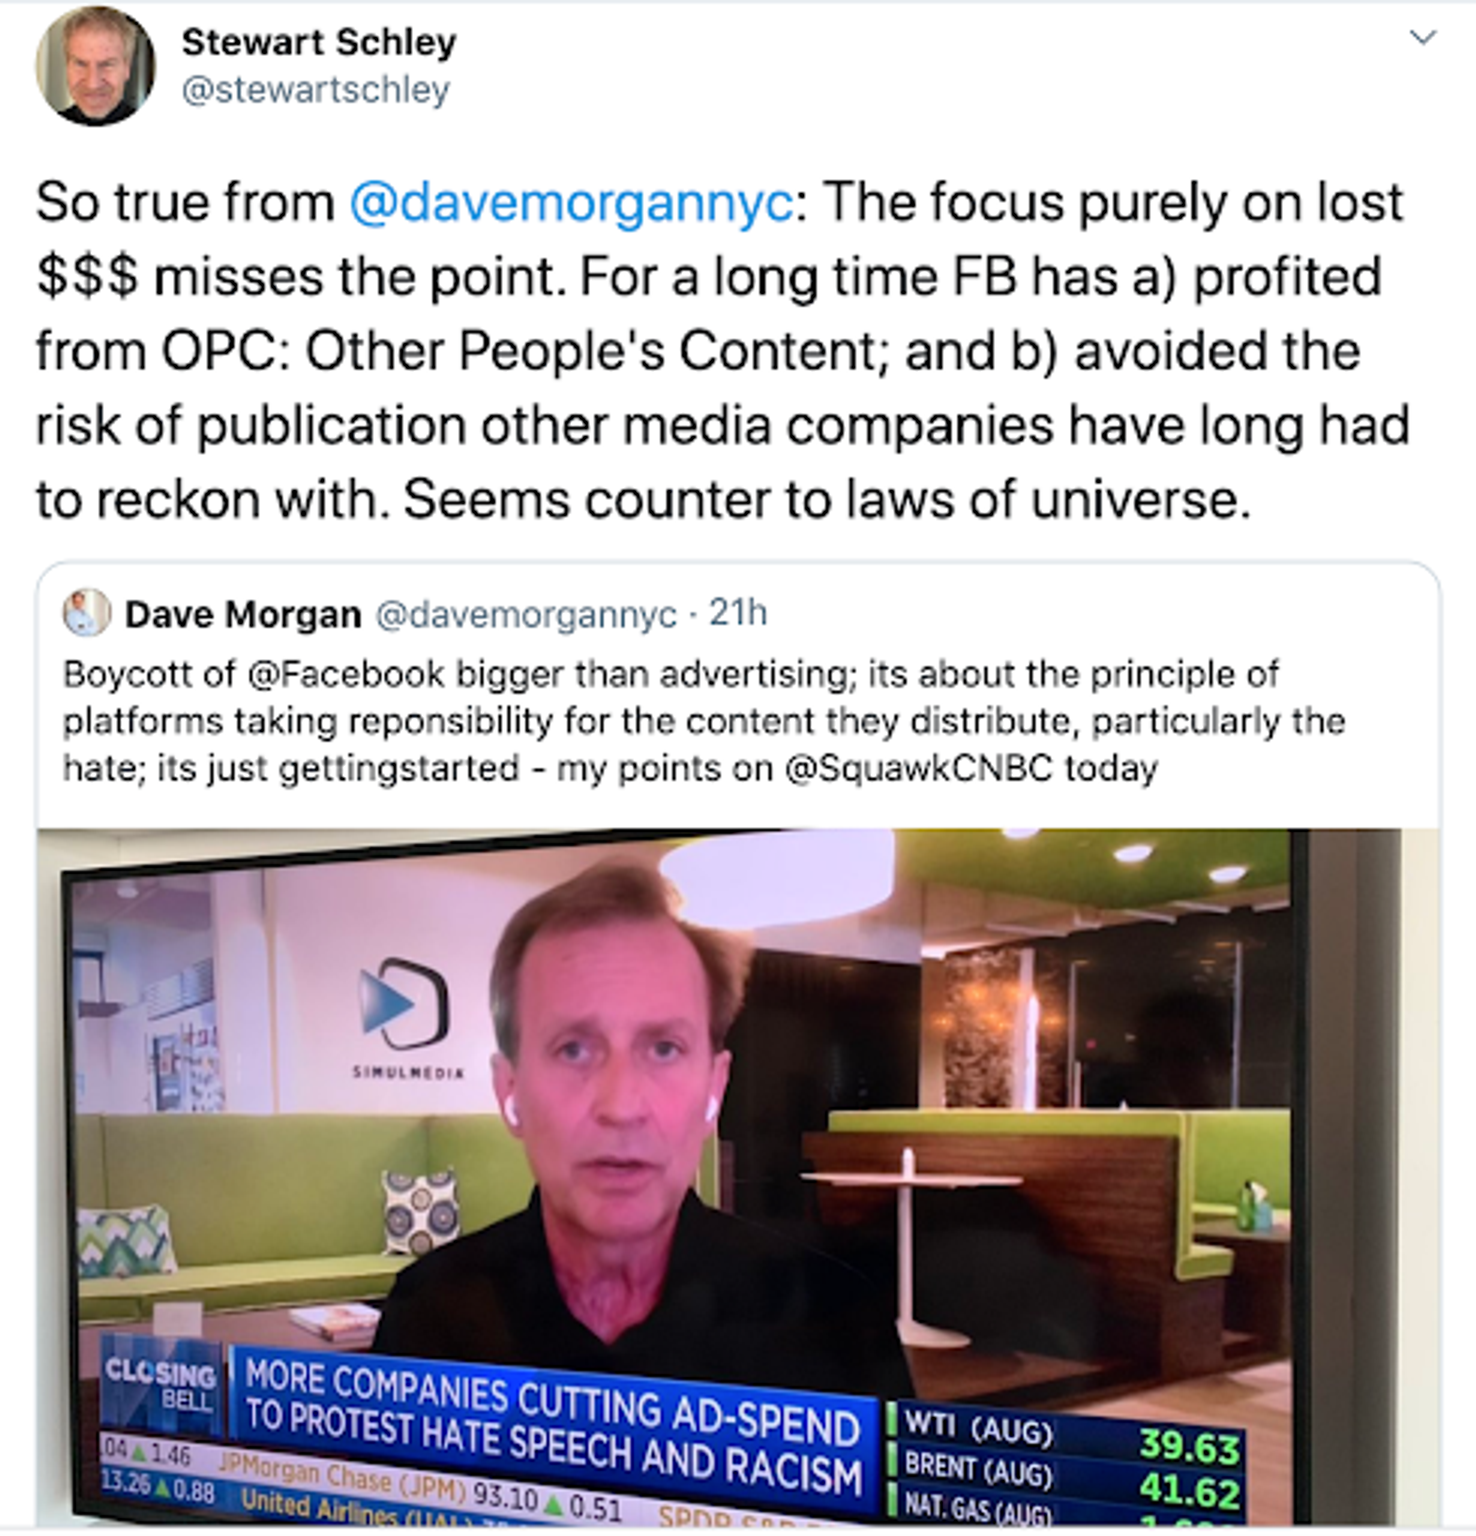 stewart schley retweets Dave Morgans appearance on closing bell